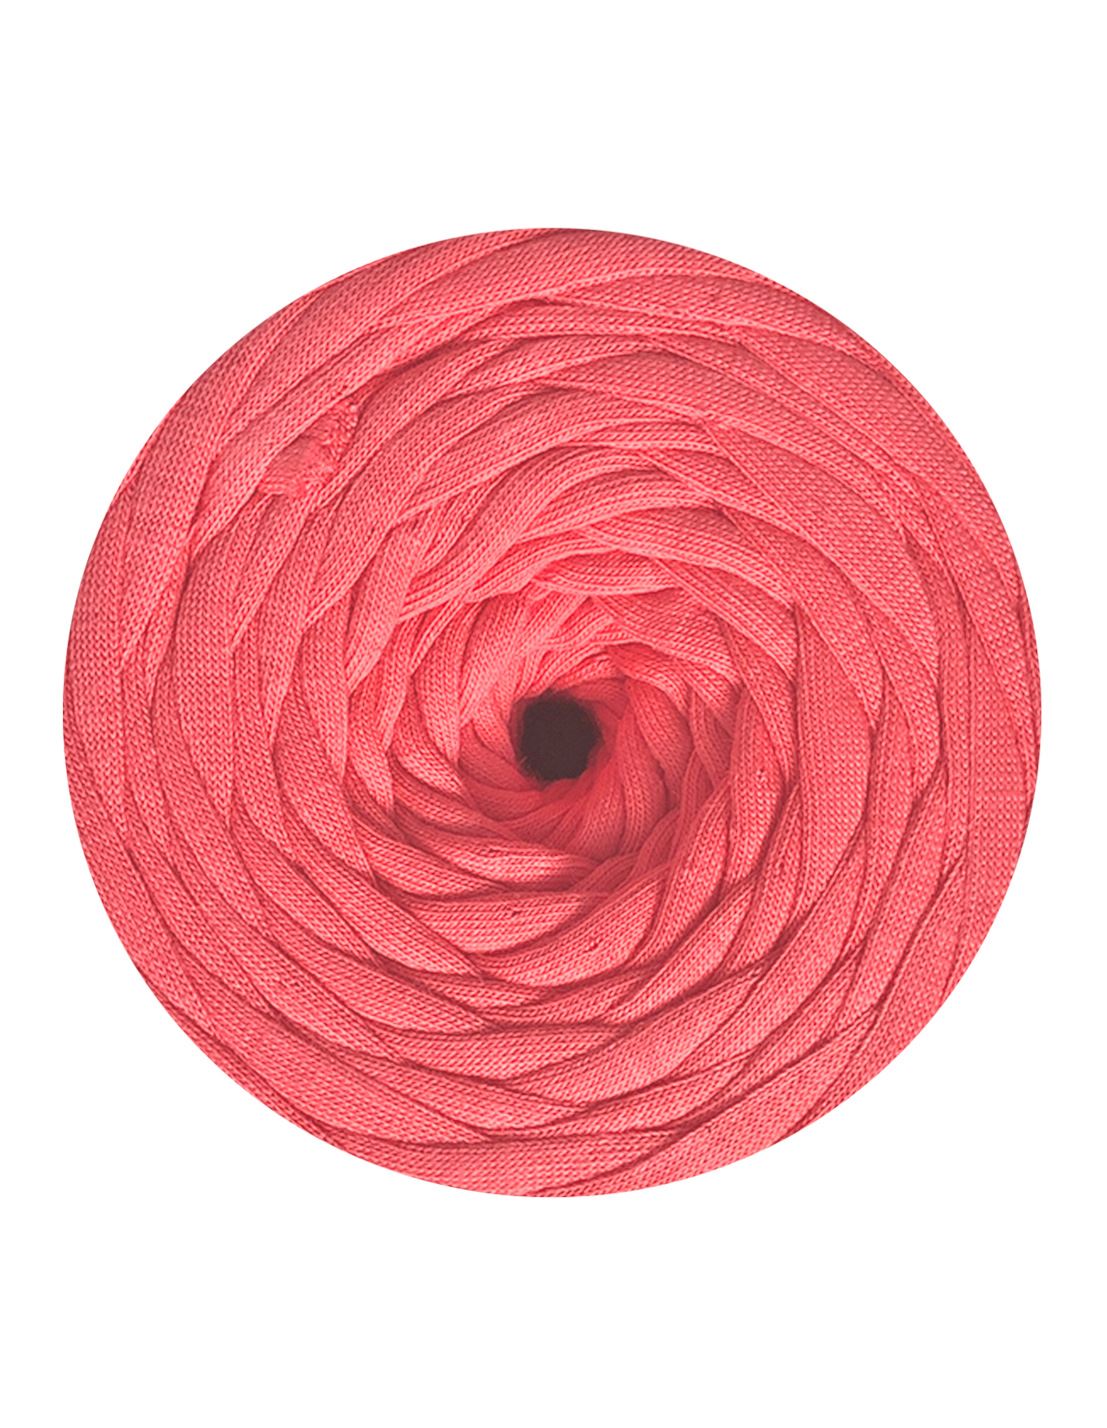 Coral pink Jersey Be Good t-shirt yarn by Wool and the Gang (500g)